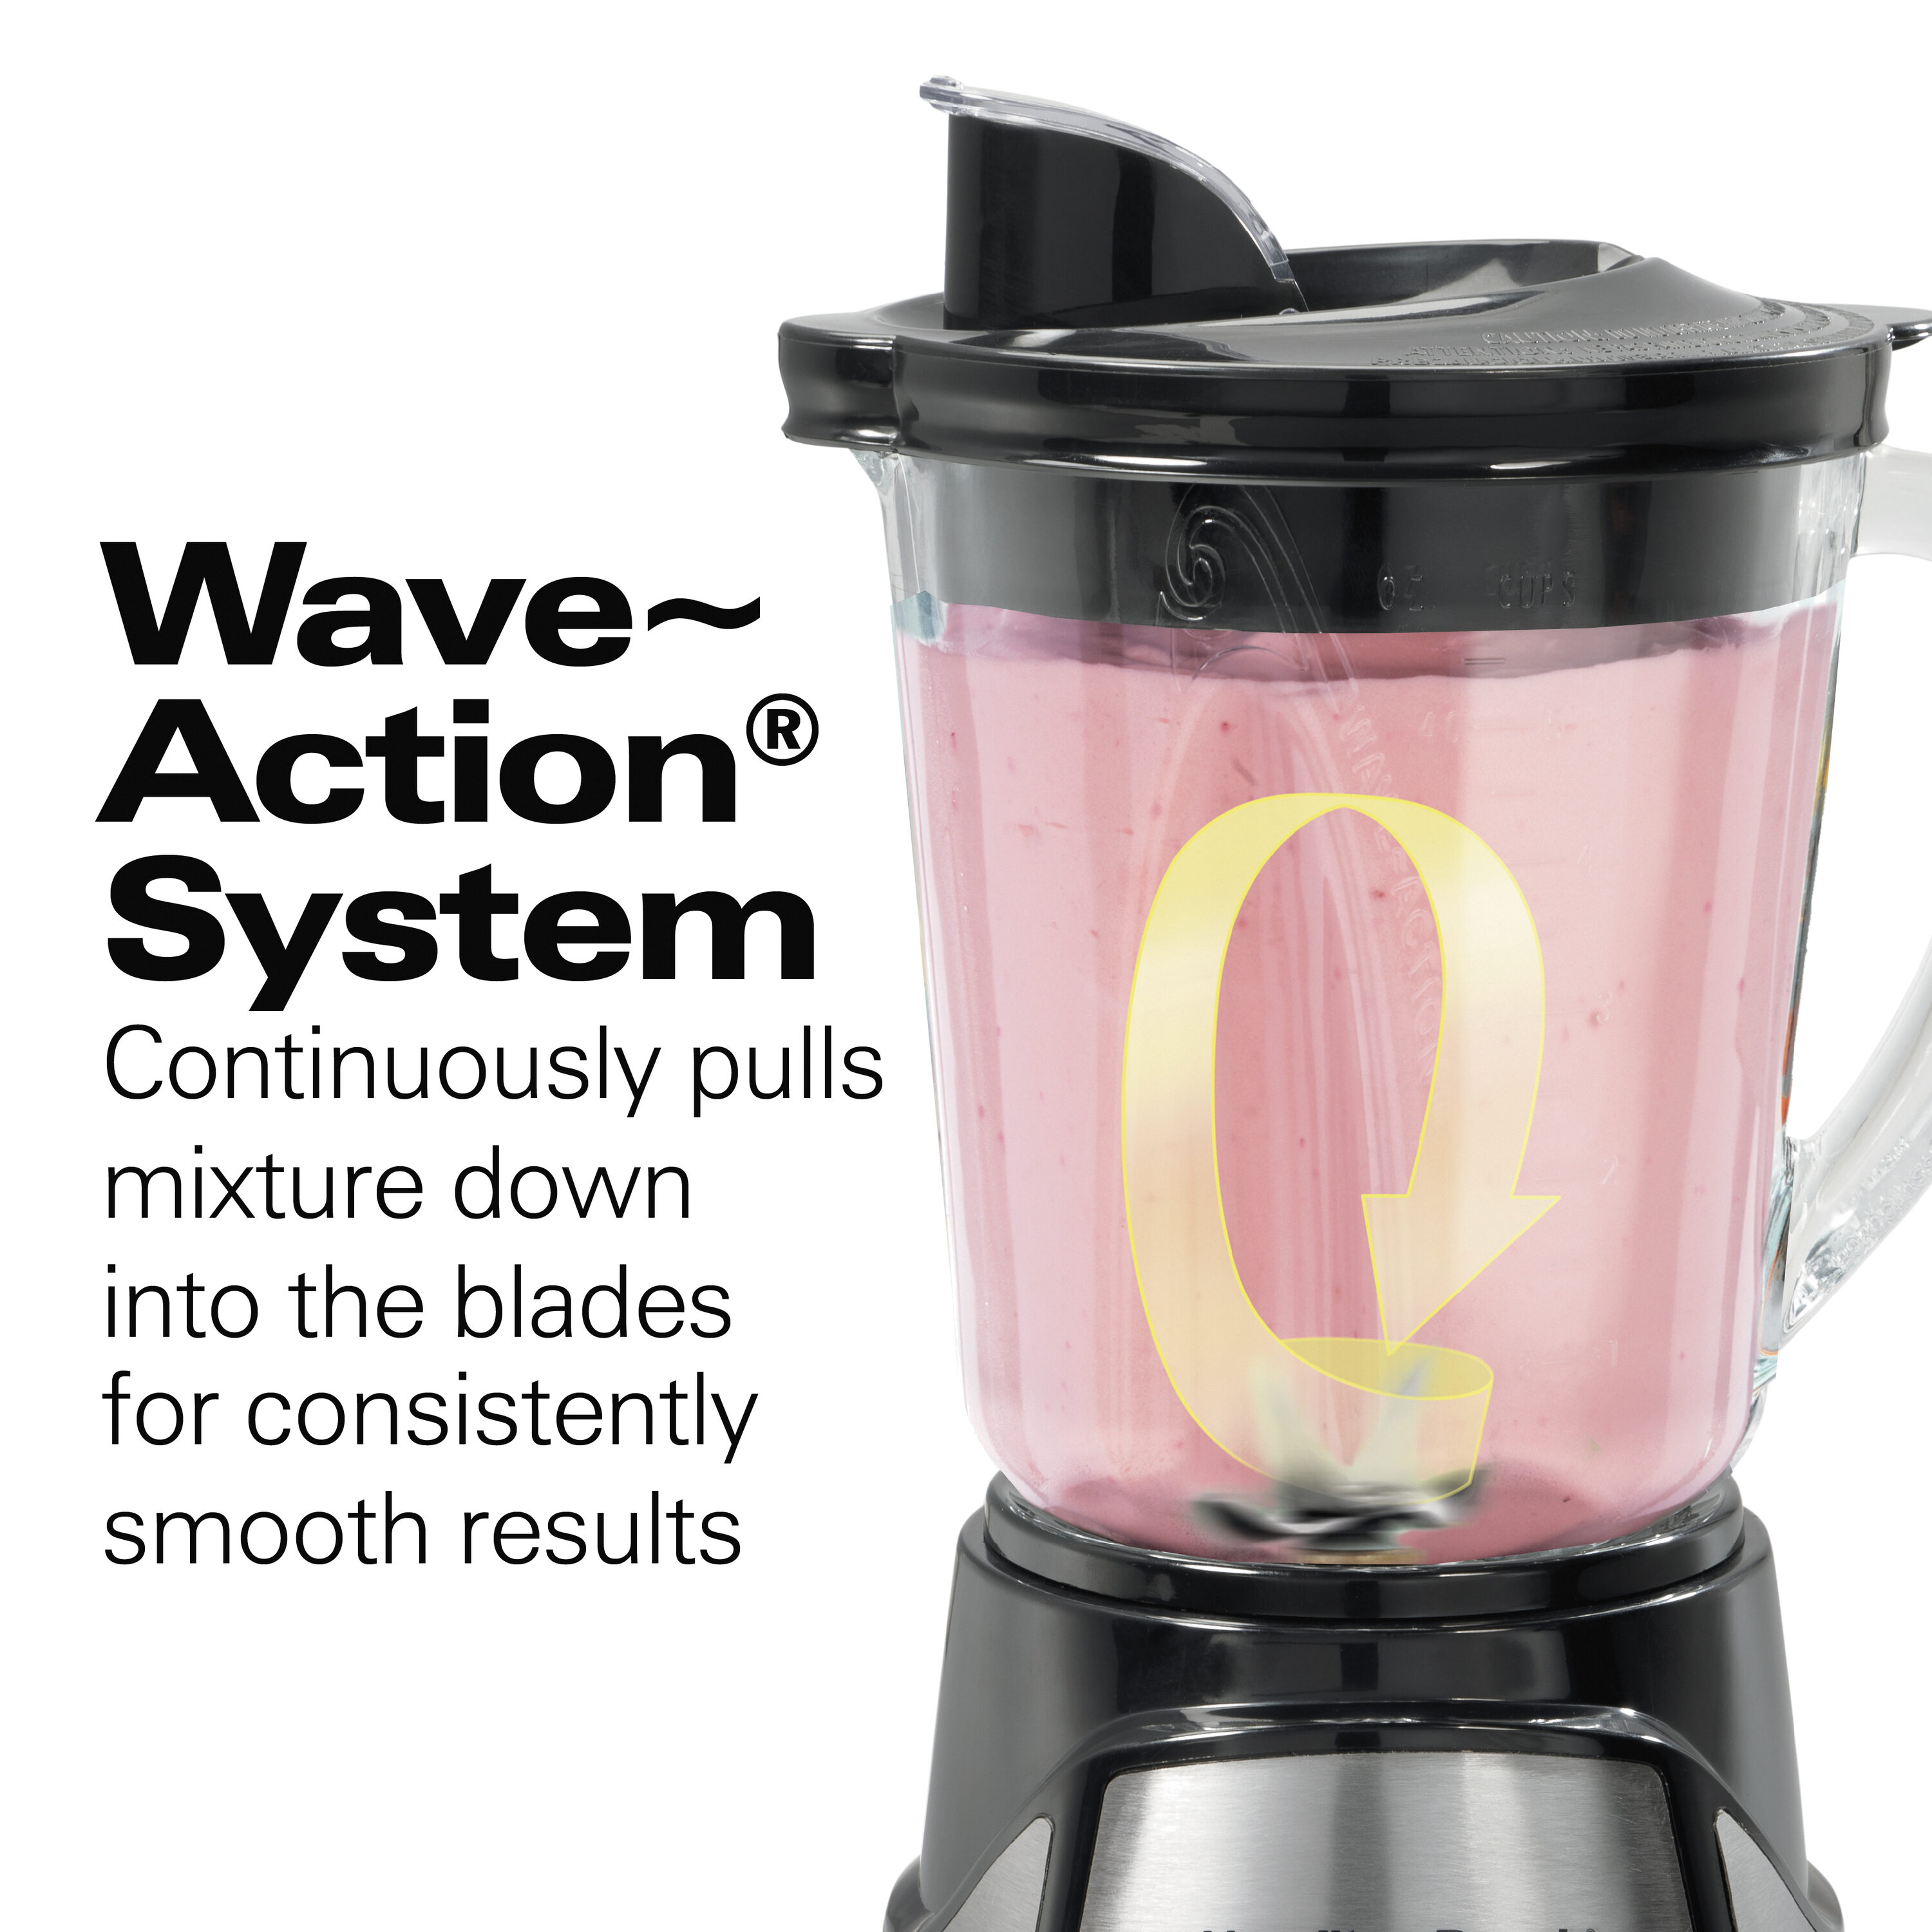 Hamilton Beach Power Elite Wave Action blender-for Shakes & Smoothies,  Puree, Crush Ice, 40 Oz Glass Jar, 12 Functions, Stainless Steel Ice